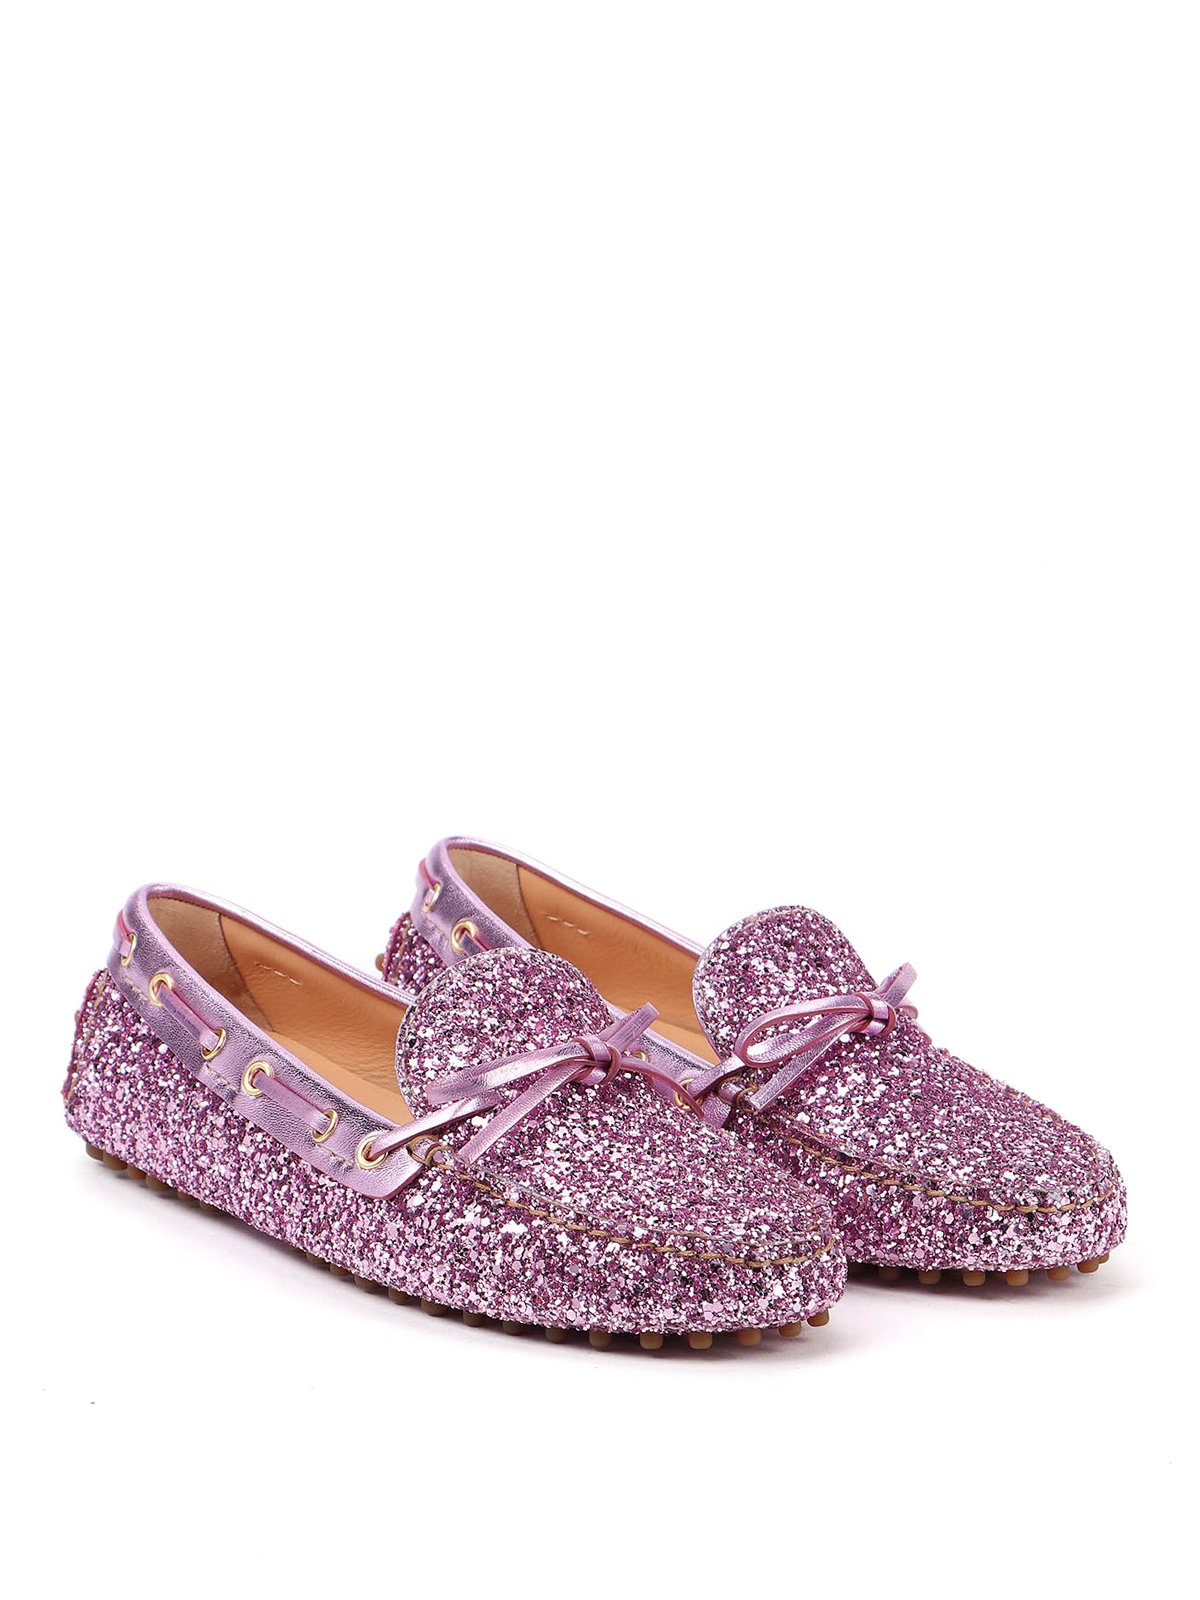 pink glitter loafers